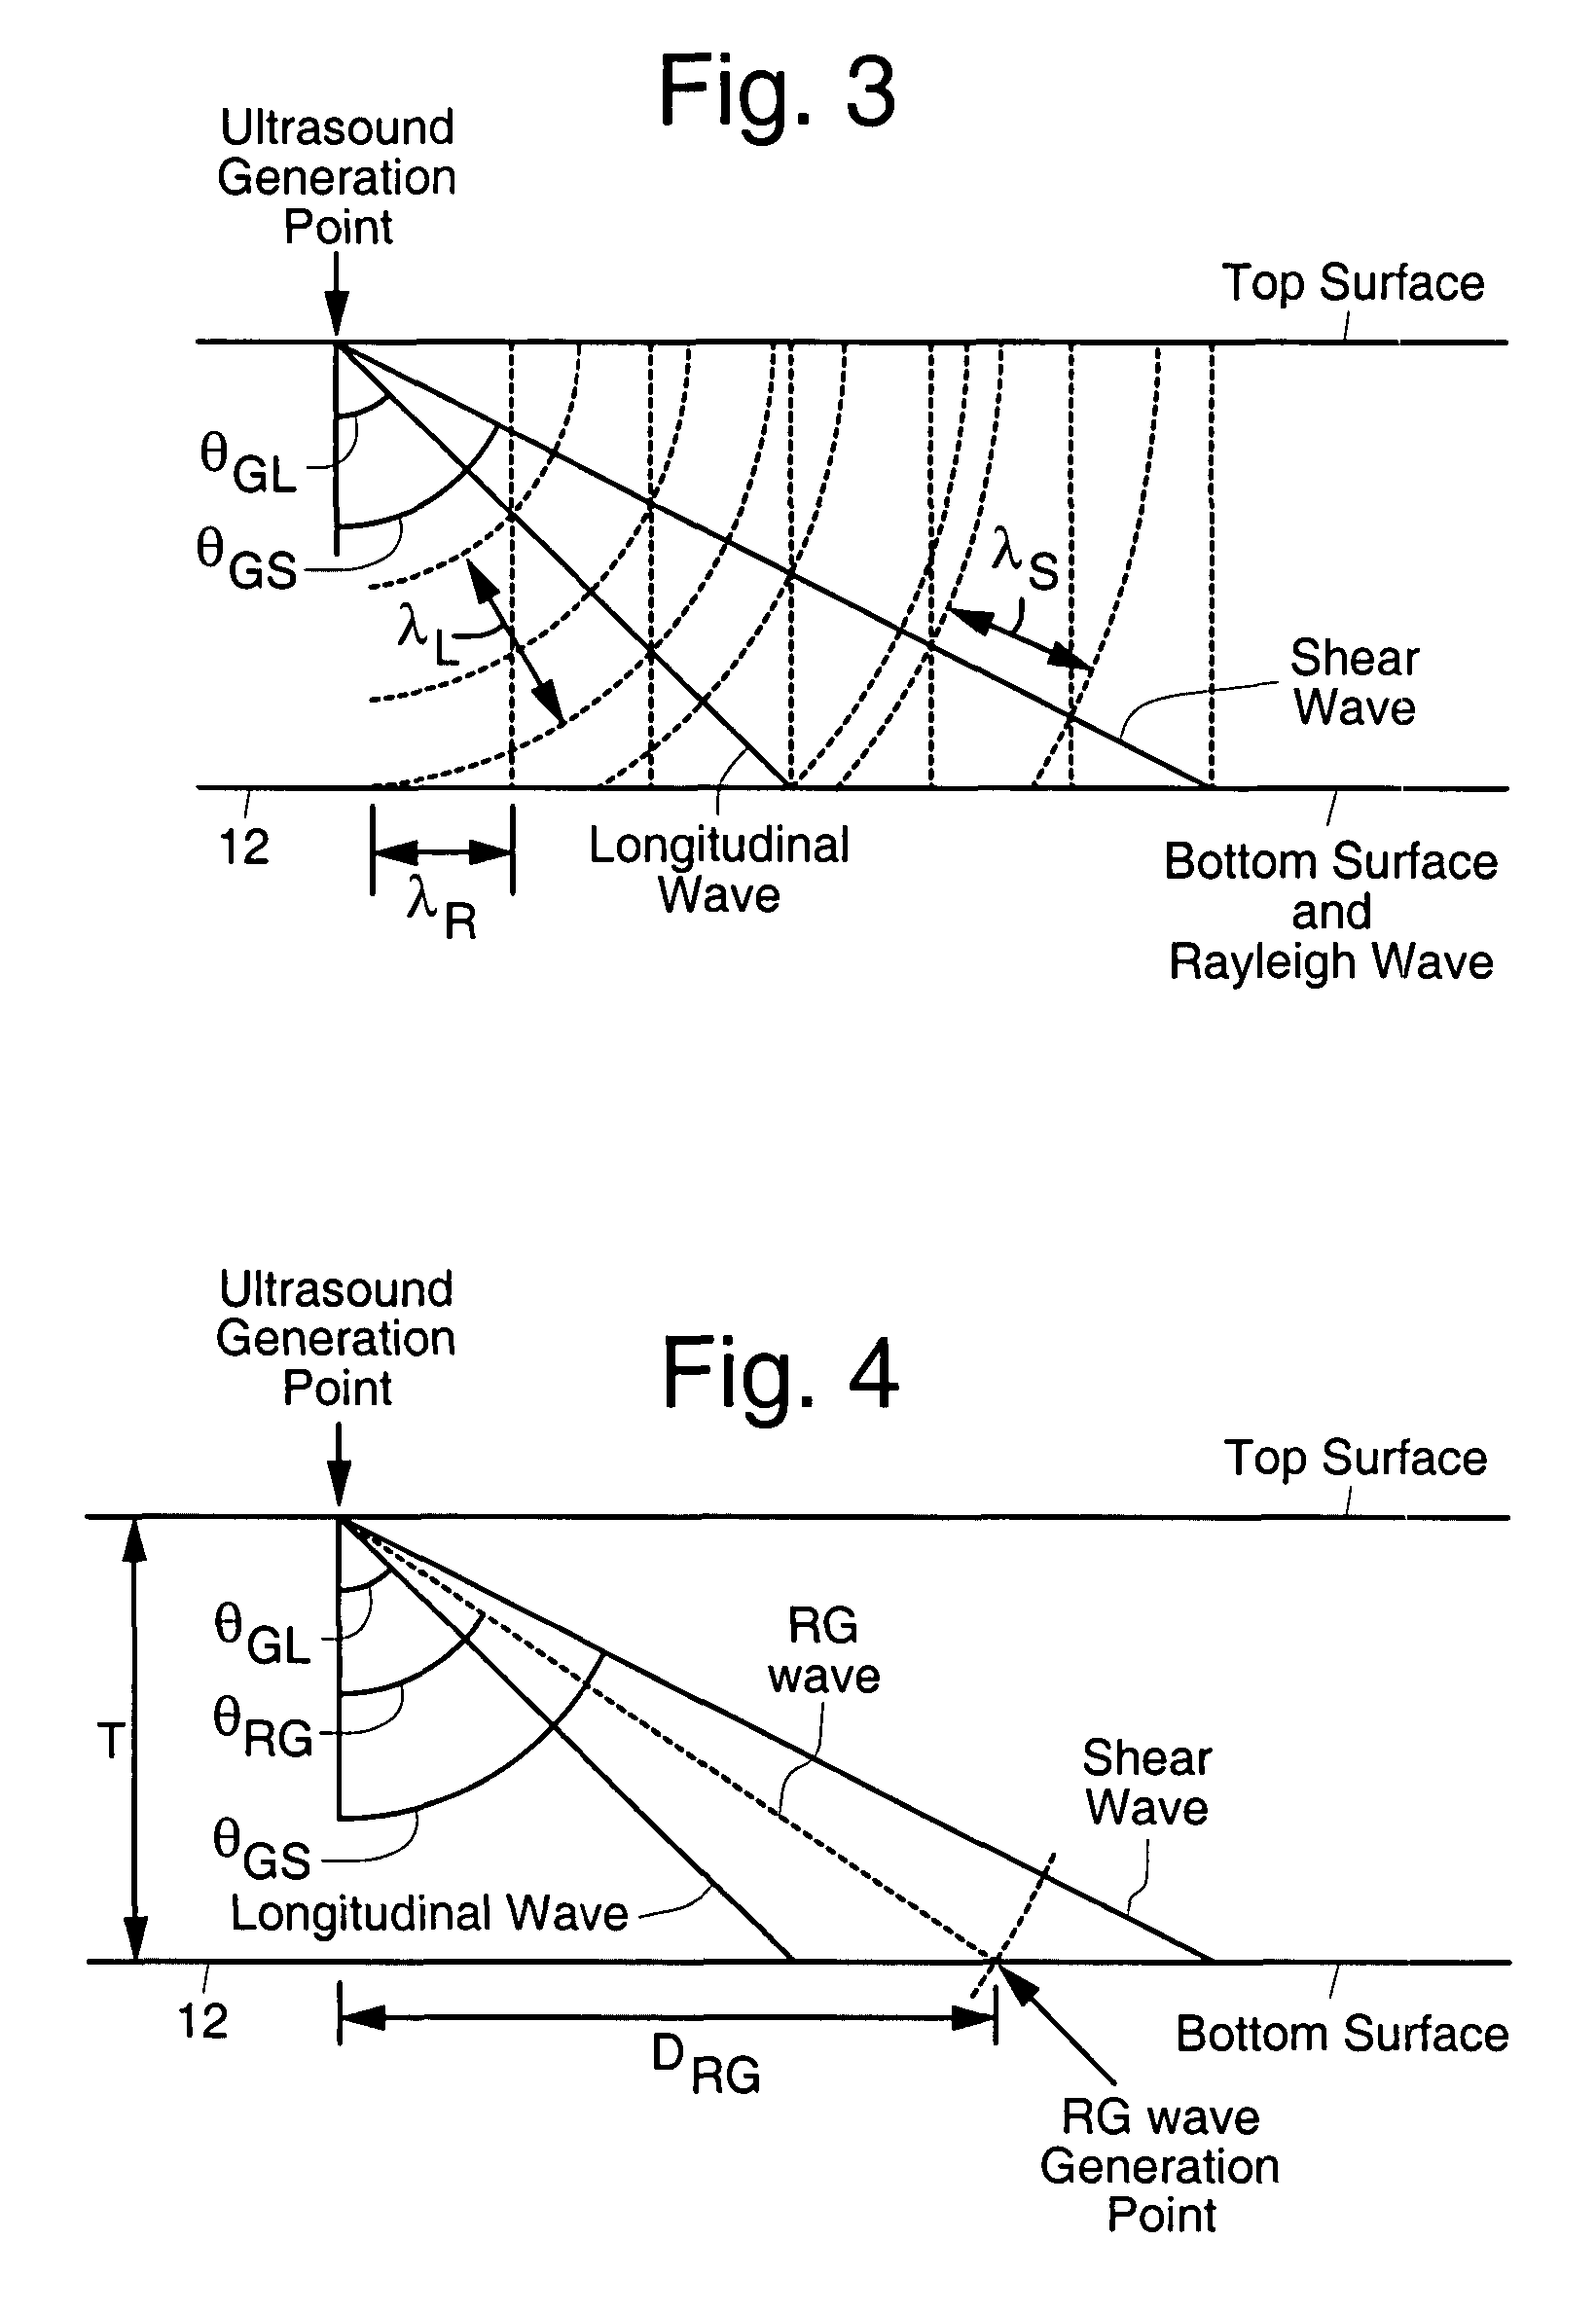 Ultrasound systems and method for measuring weld penetration depth in real time and off line